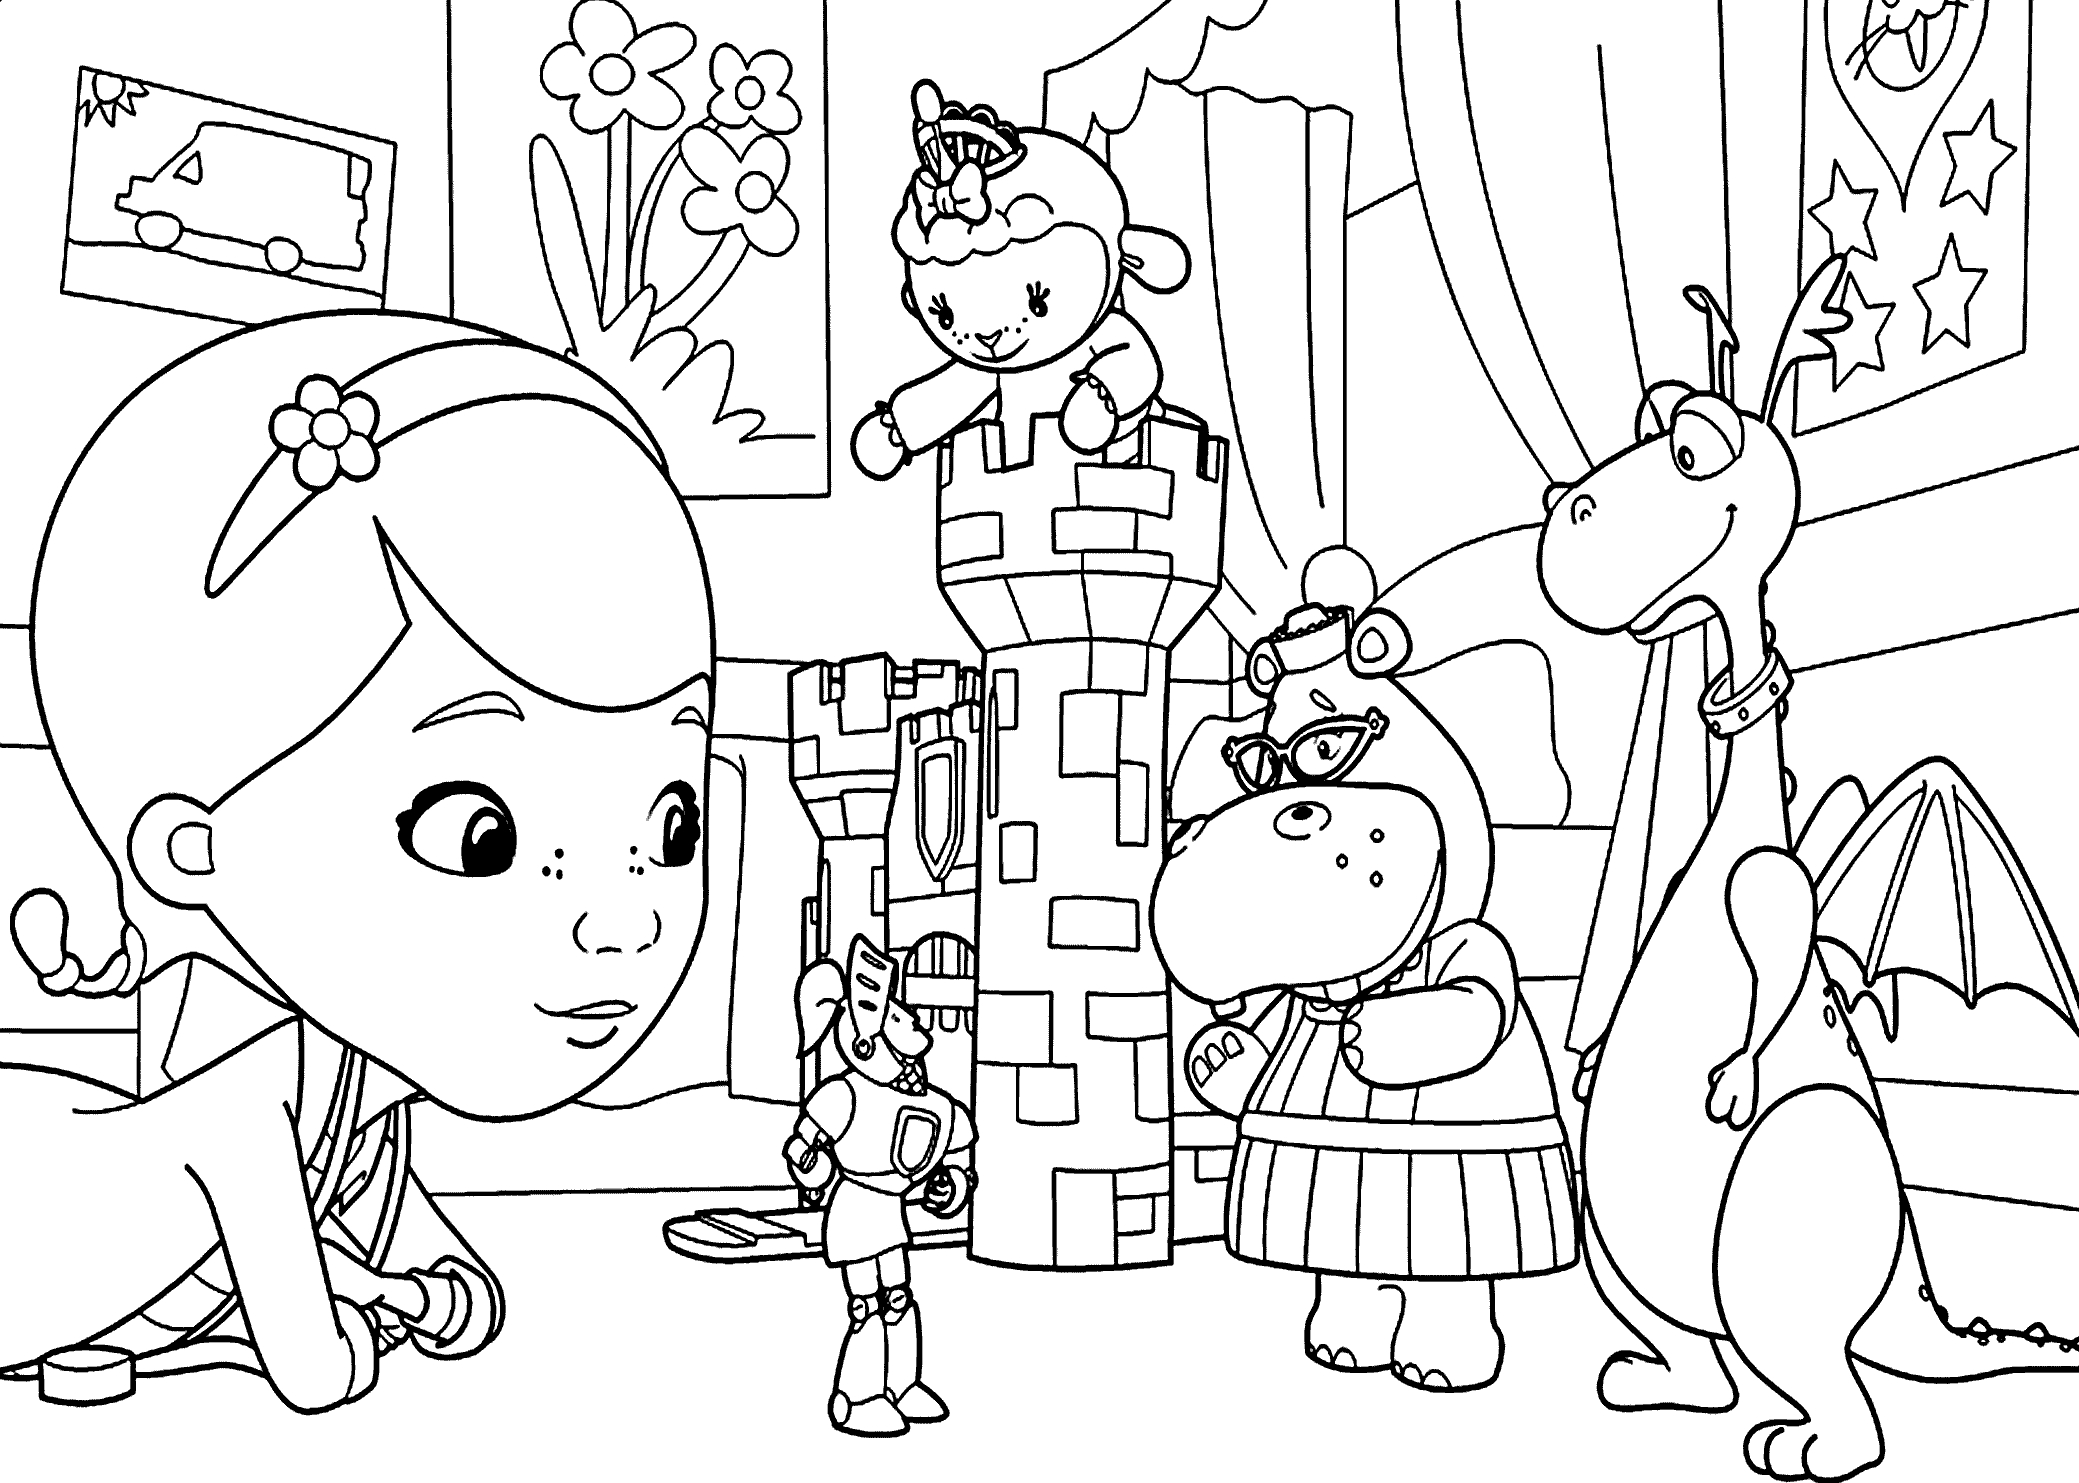 Doc Mcstuffins Coloring Pages at GetColorings.com | Free printable